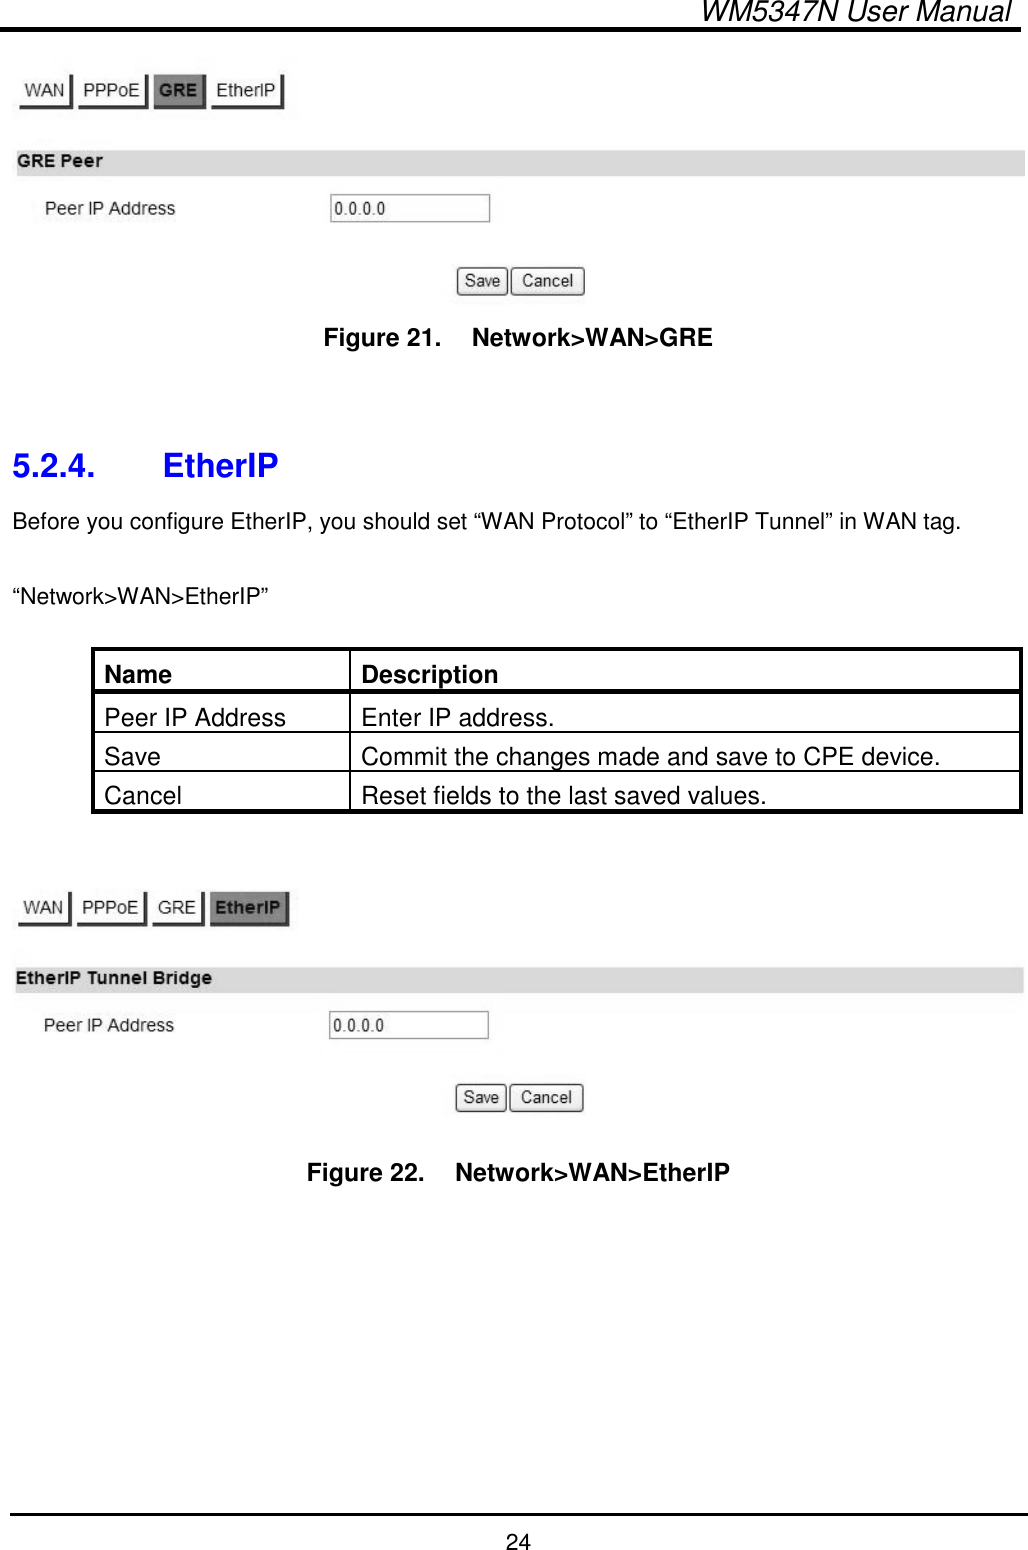  WM5347N User Manual  24  Figure 21.   Network&gt;WAN&gt;GRE   5.2.4.  EtherIP Before you configure EtherIP, you should set “WAN Protocol” to “EtherIP Tunnel” in WAN tag.  “Network&gt;WAN&gt;EtherIP”  Name  Description Peer IP Address  Enter IP address. Save  Commit the changes made and save to CPE device. Cancel  Reset fields to the last saved values.   Figure 22.   Network&gt;WAN&gt;EtherIP         